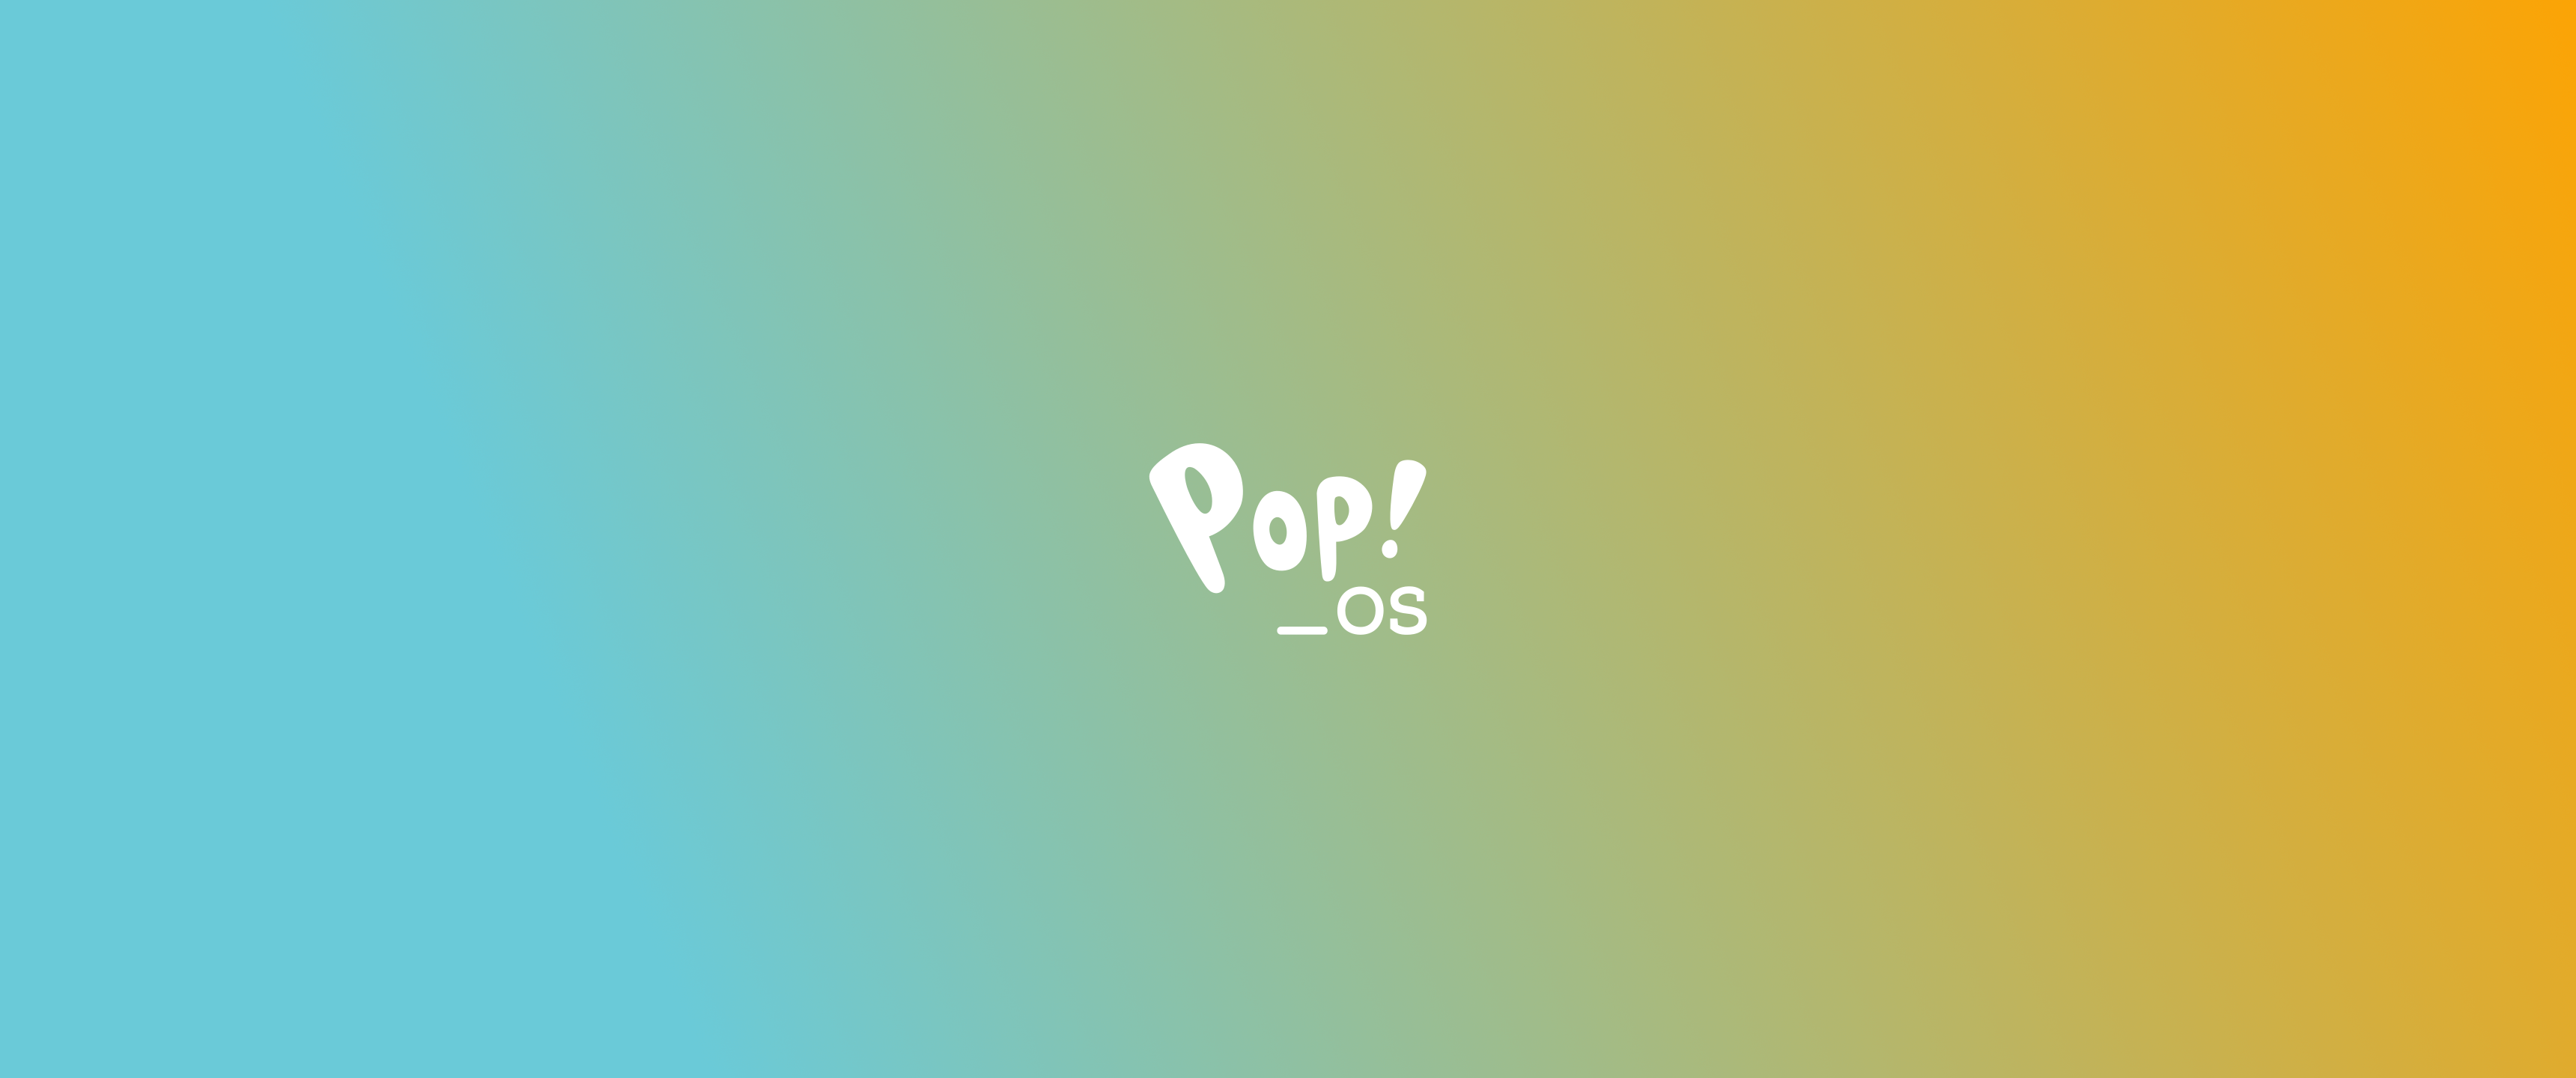 General 3440x1440 gradient minimalism operating system Pop OS Linux logo simple background